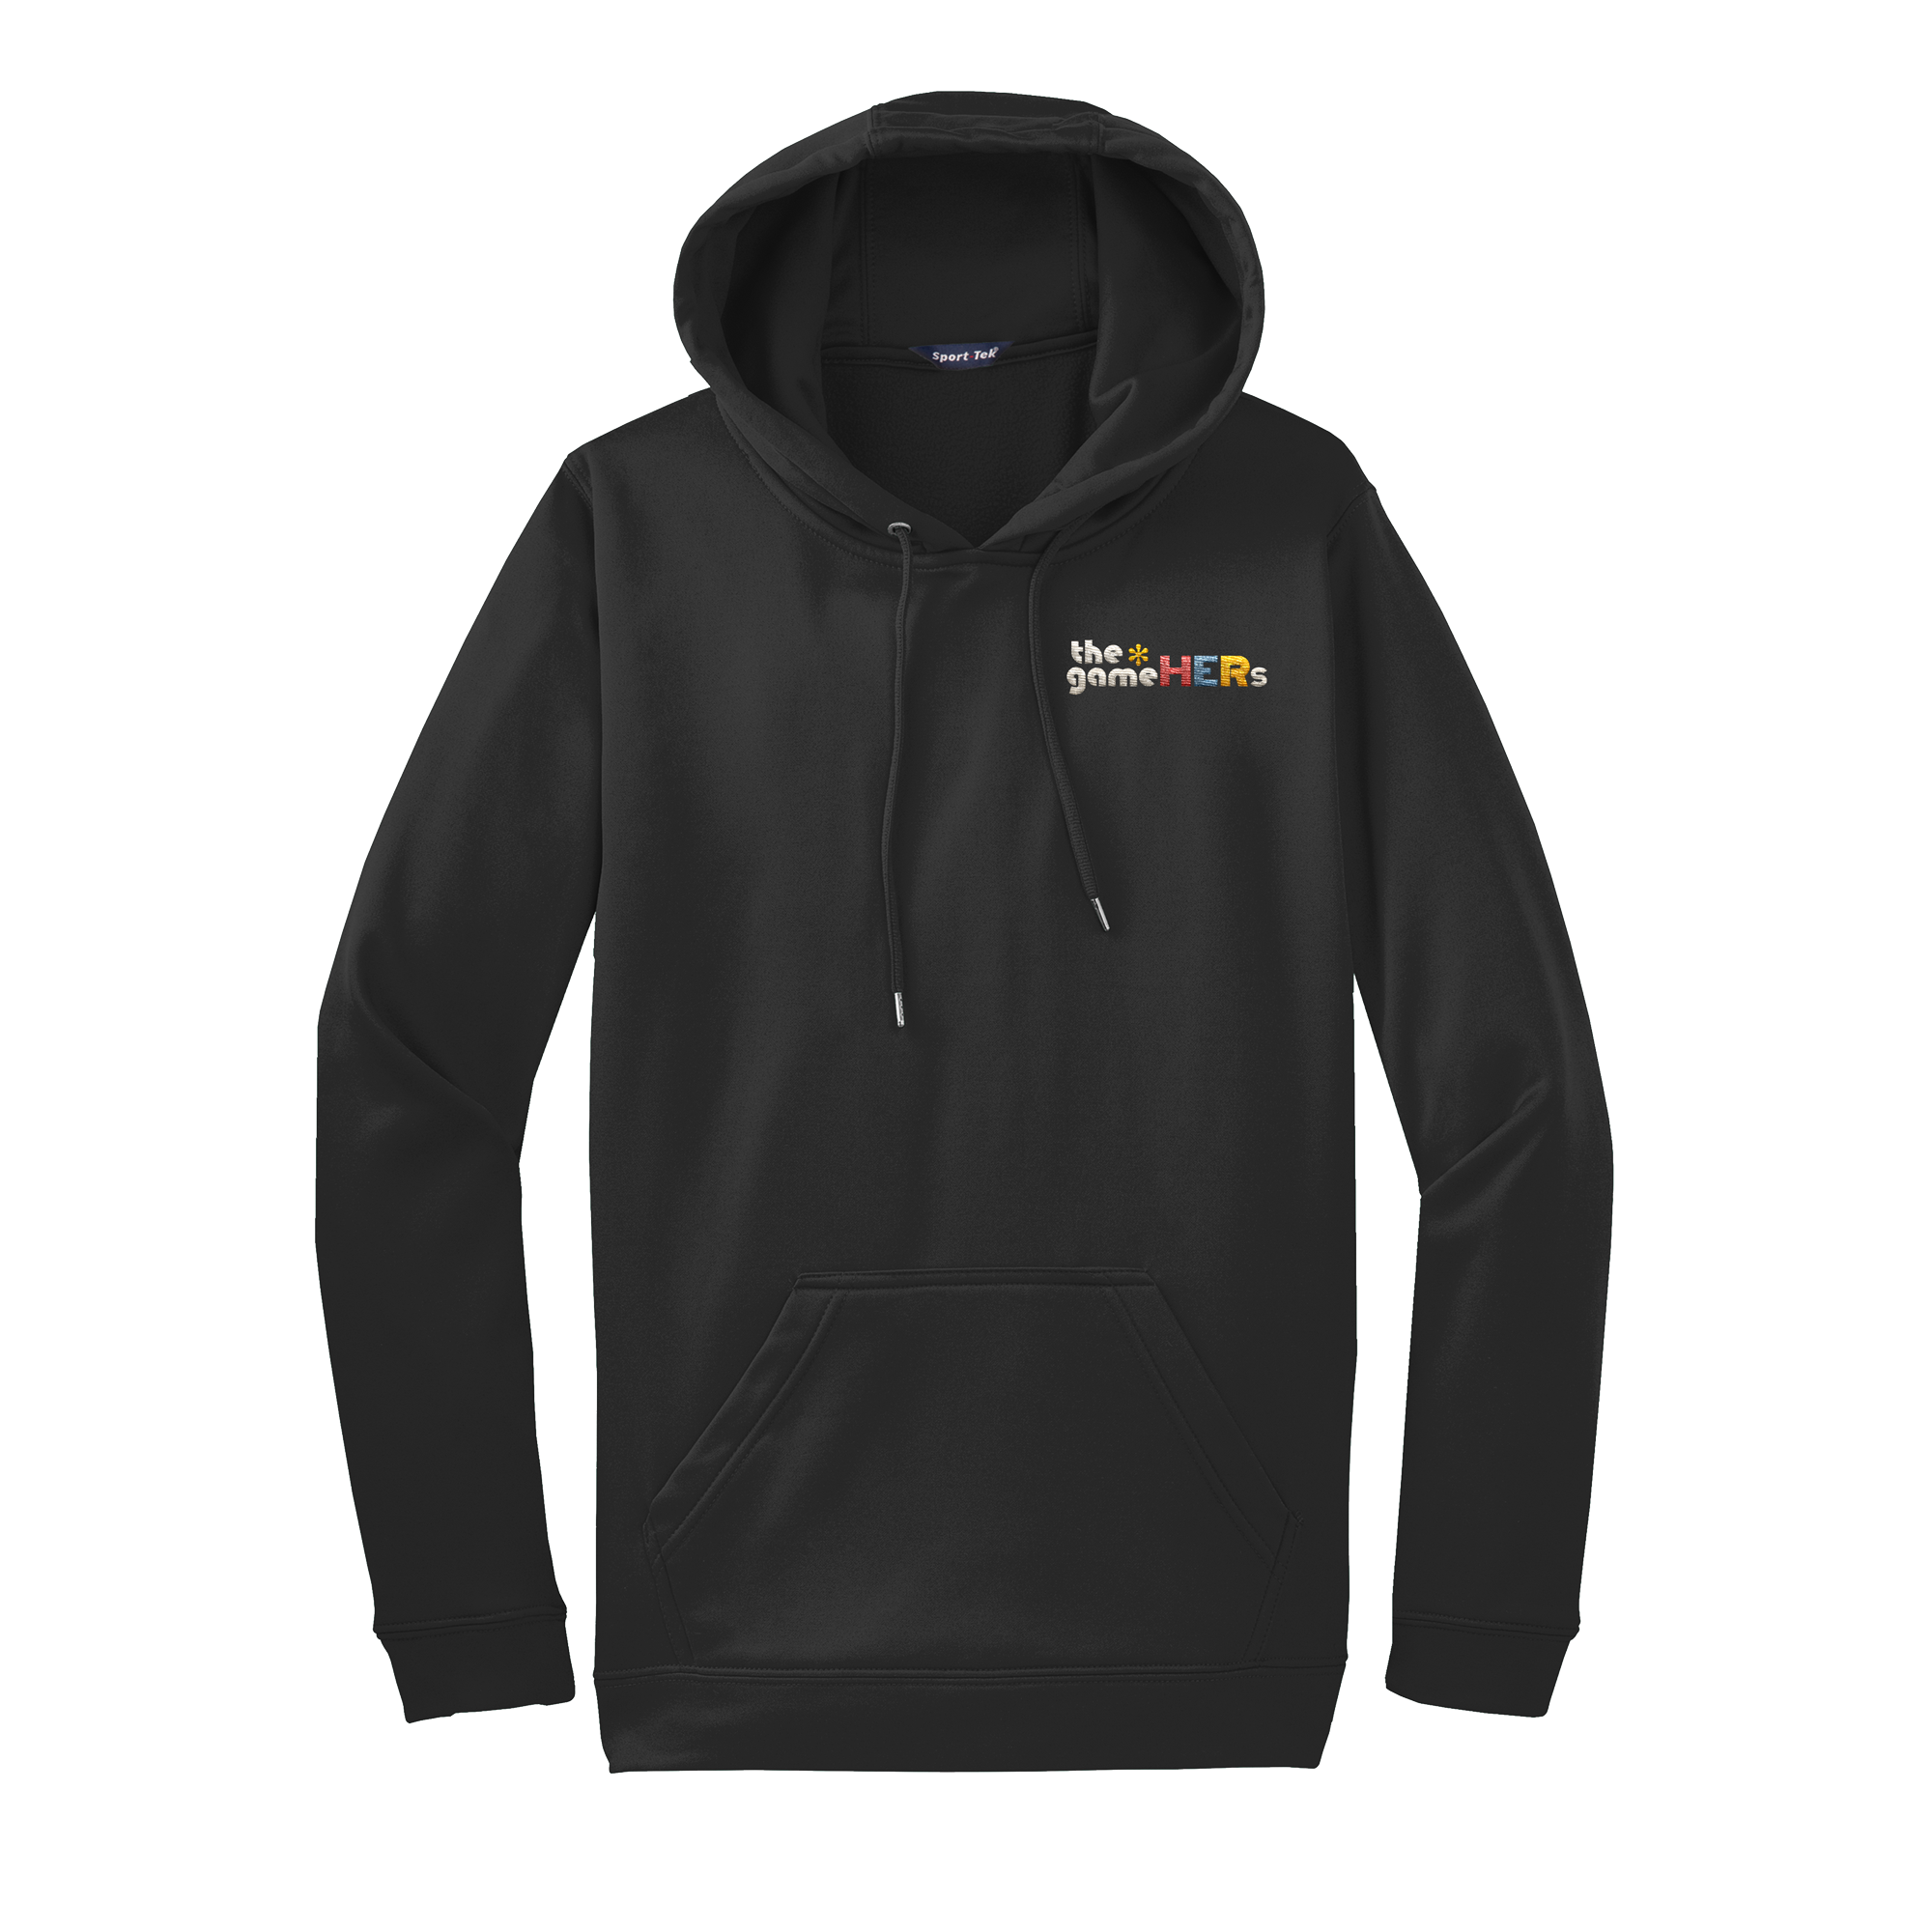 the*gameHERs Classic Hooded Pullover